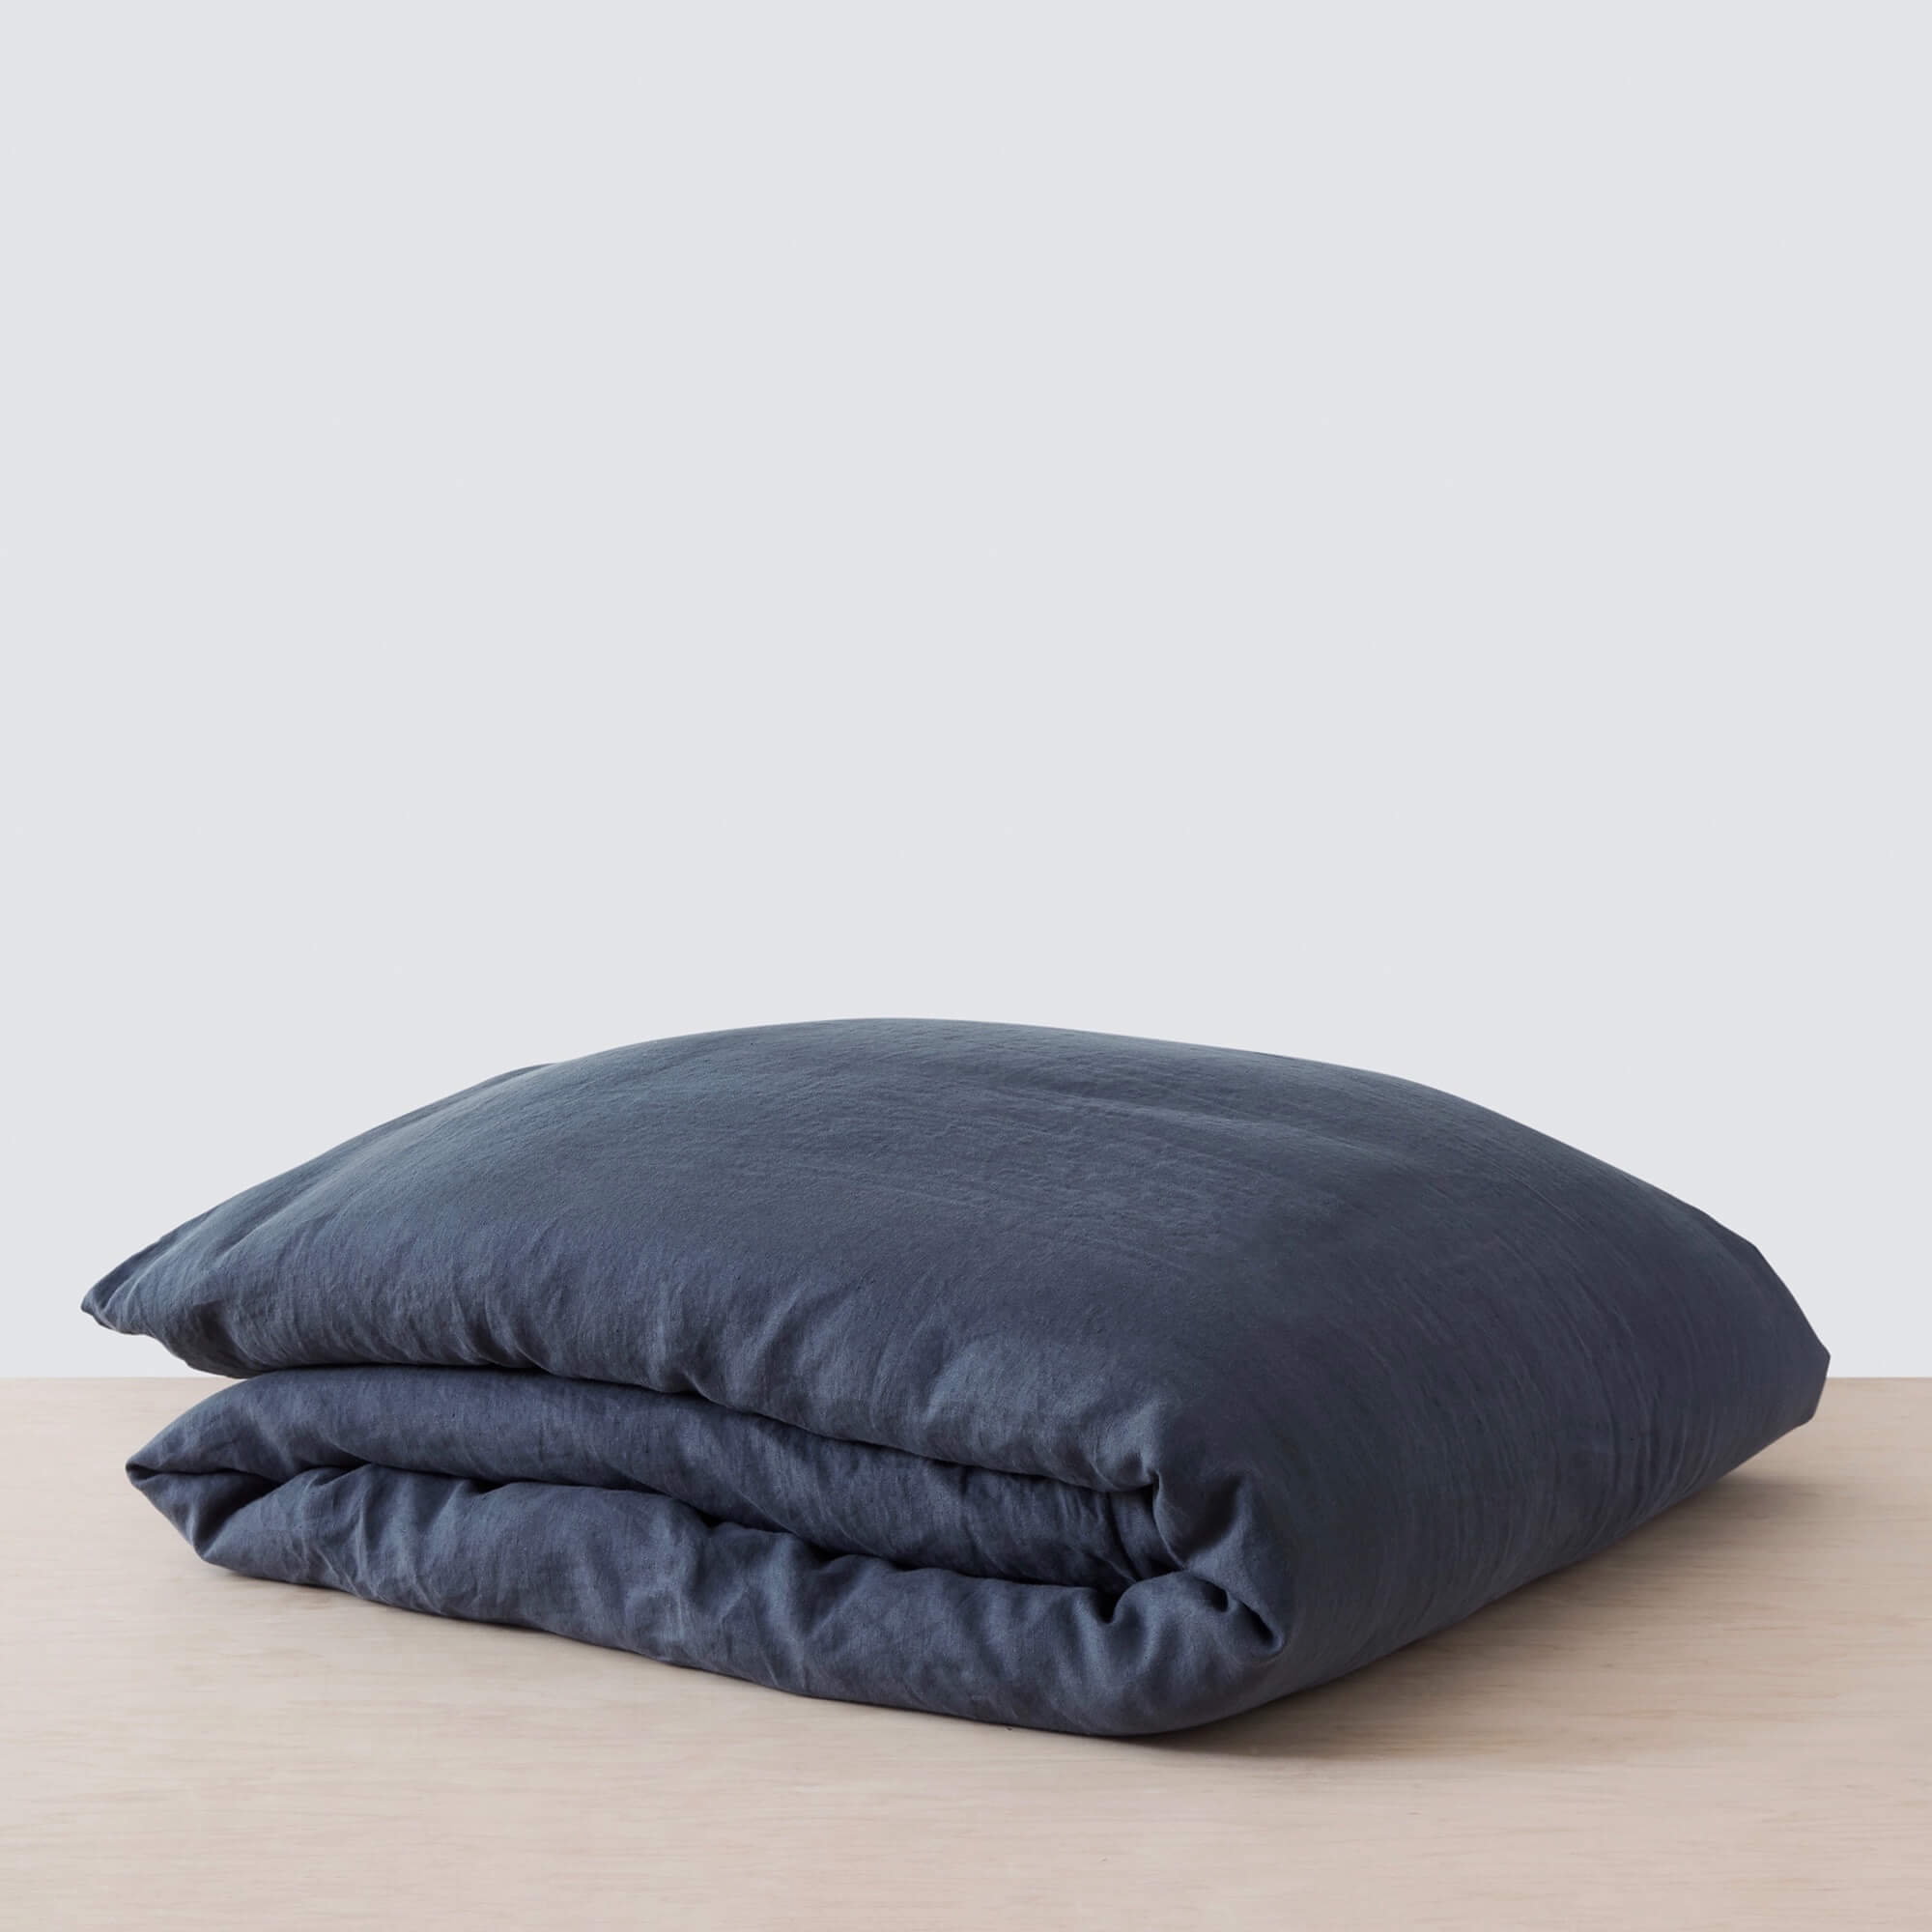 The Citizenry Stonewashed Linen Duvet Cover | Full/Queen | Duvet Only | Sienna - Image 10